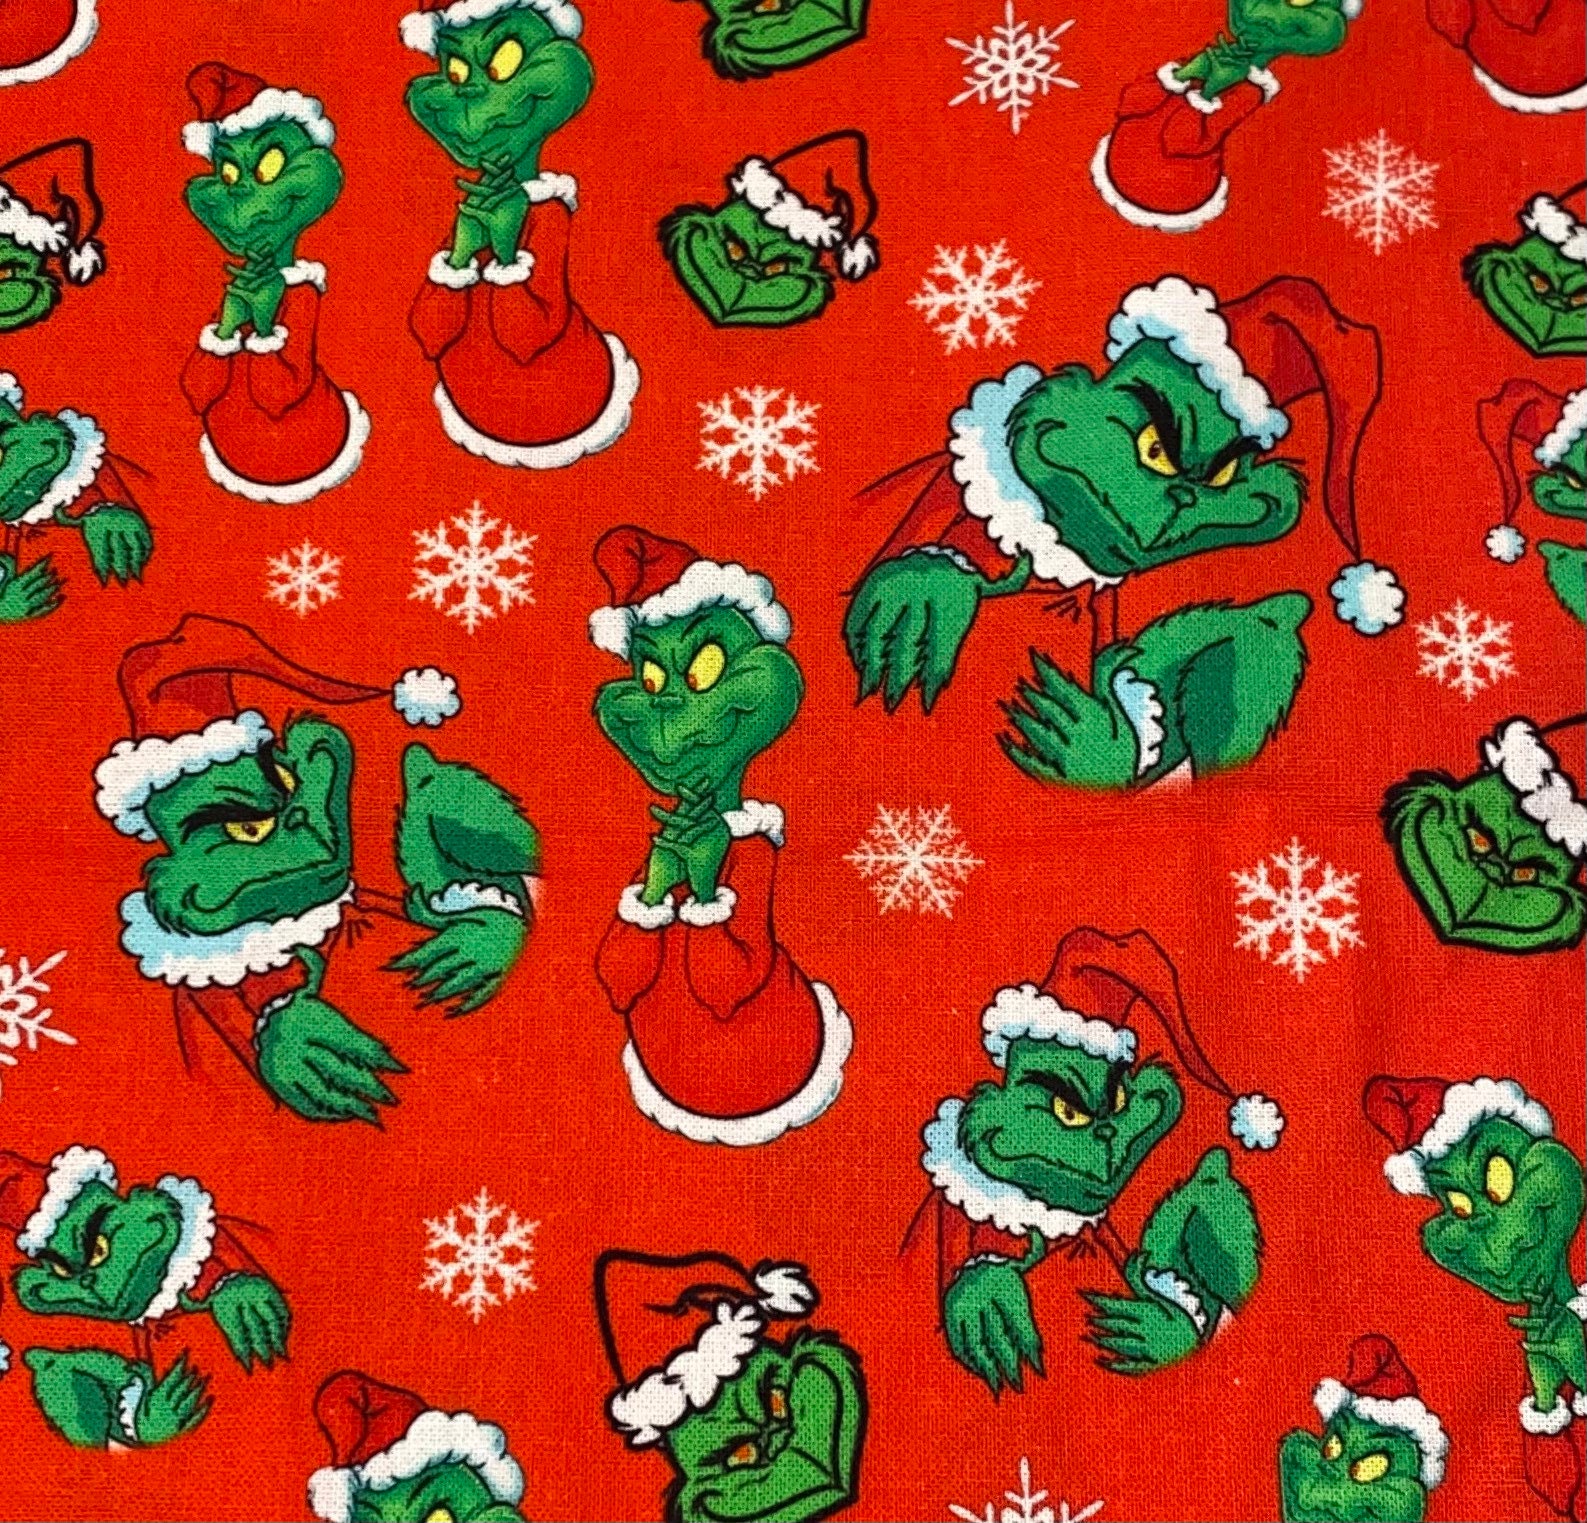 Grinch Merry Grinchmas 100 % Cotton Fabric by the Yard | Etsy